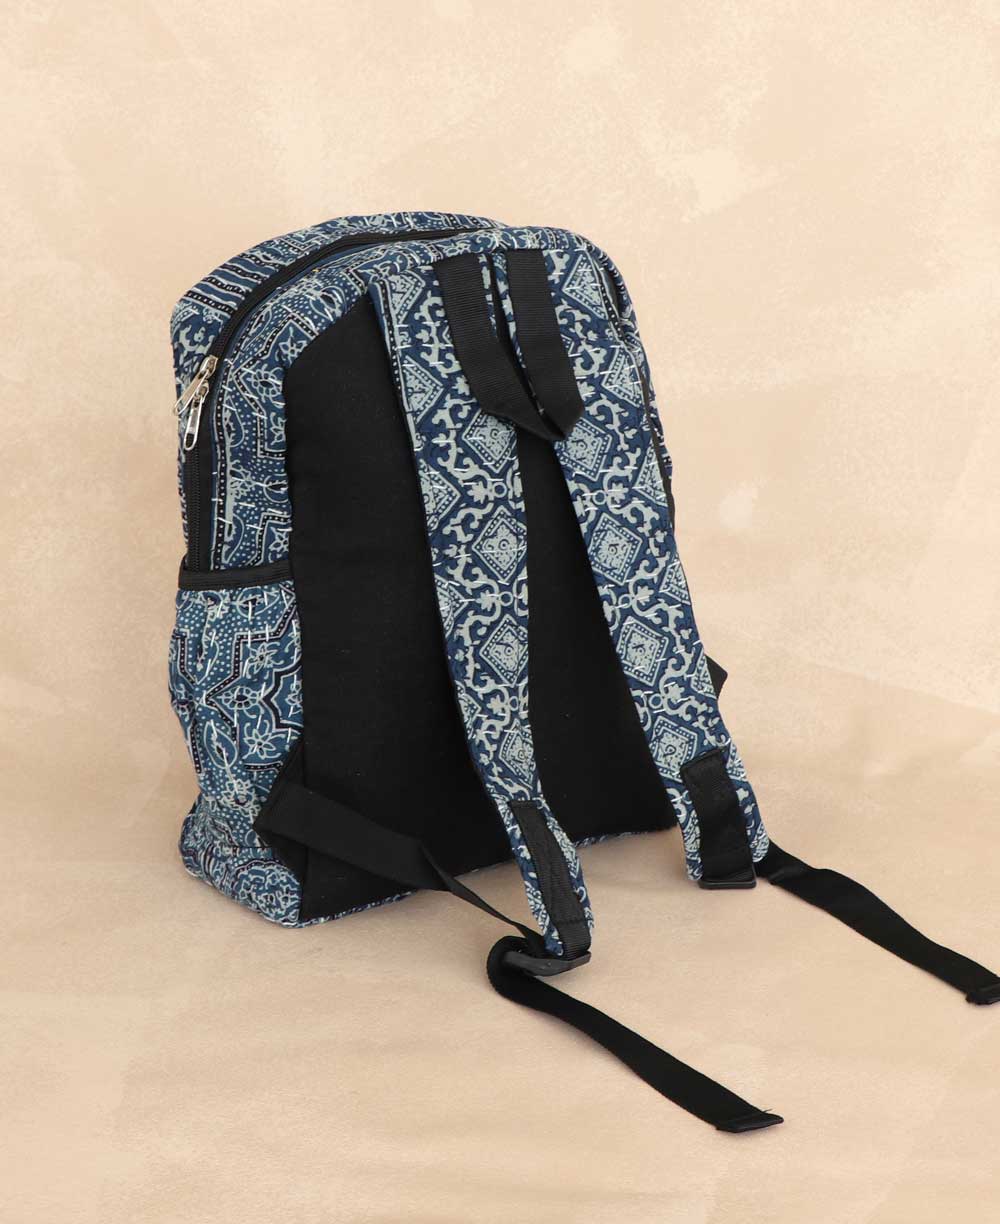 Back view of the Block-Print Kantha Stitched Backpack